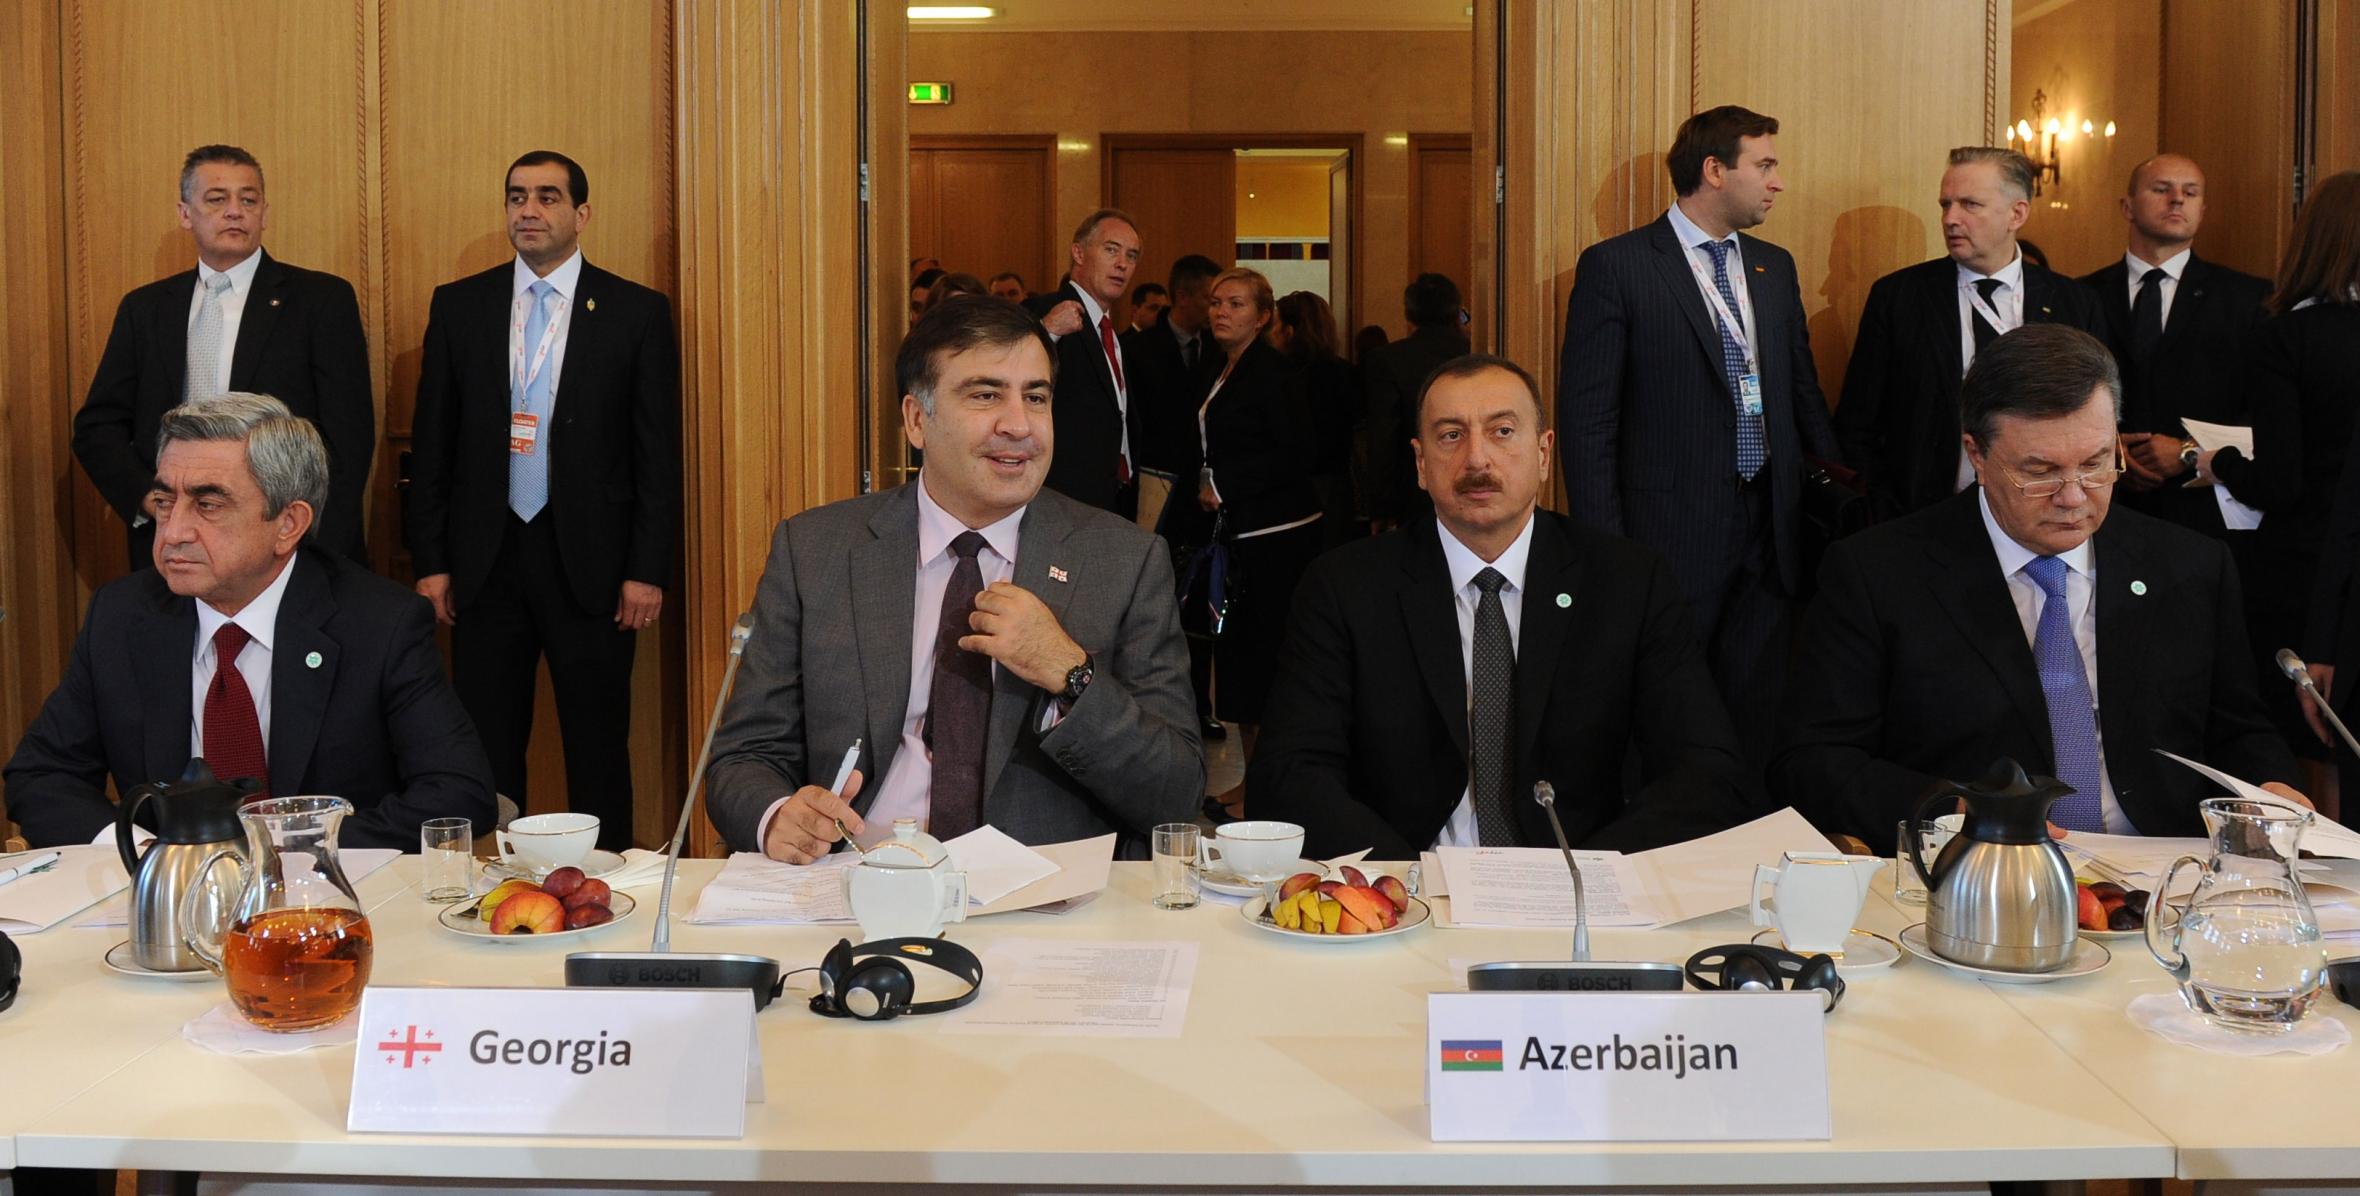 Ilham Aliyev attended the European Union “Eastern Partnership” summit in Warsaw